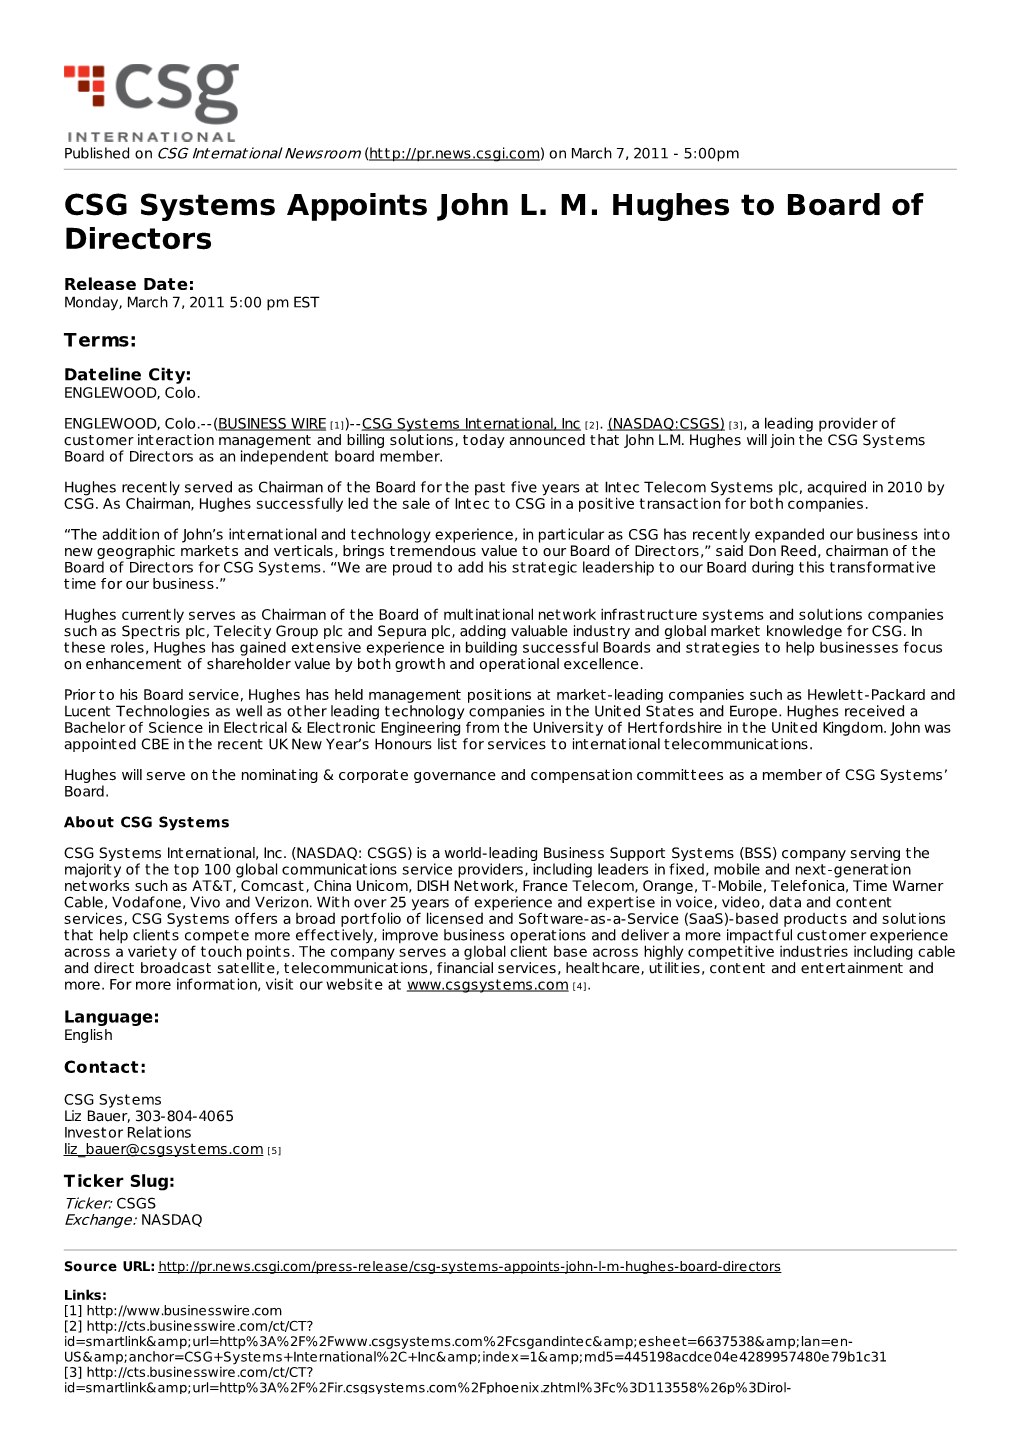 CSG Systems Appoints John L. M. Hughes to Board of Directors